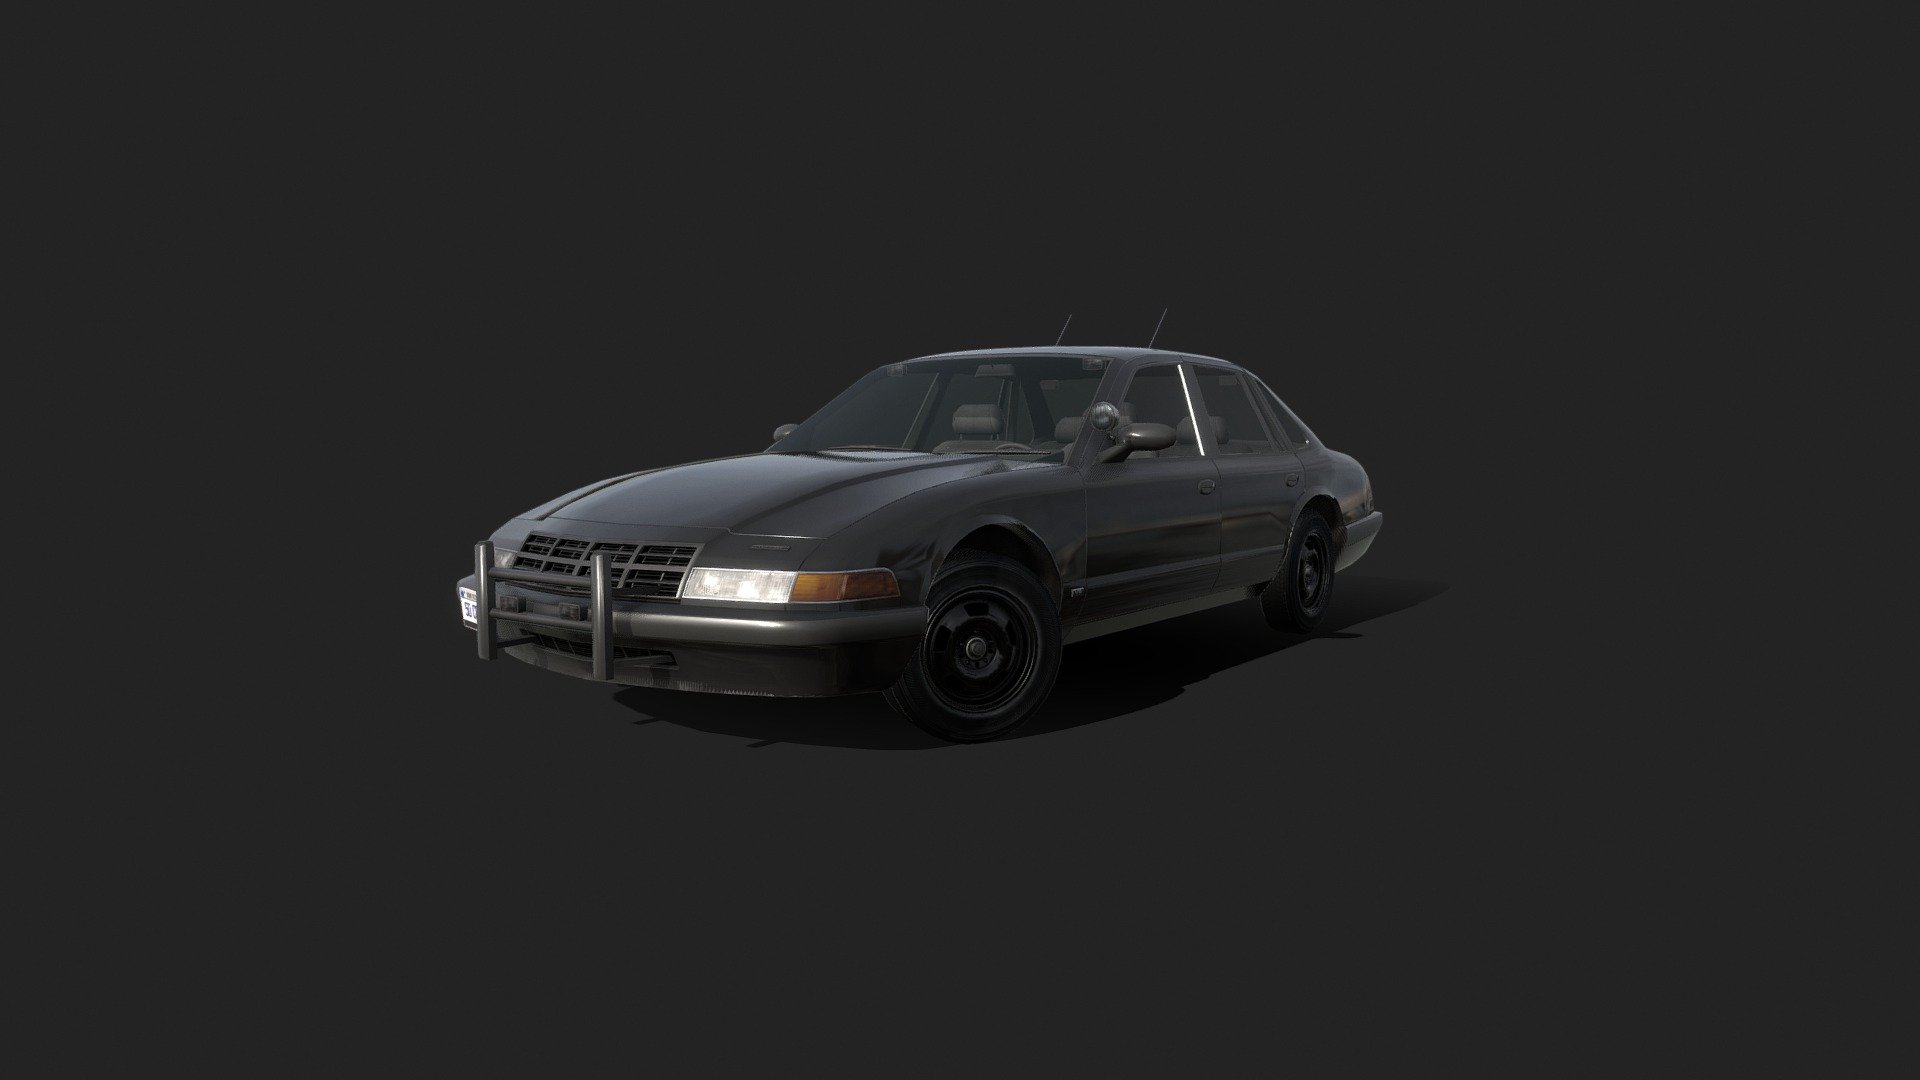 Model of an American sedan of the 90s in a police package. The design is inspired not only by the Crown Victorias familiar to us, but also by cab-forward Chryslers, to give a more European appearance to the body. Use the model as you see fit, and have a nice day 3d model